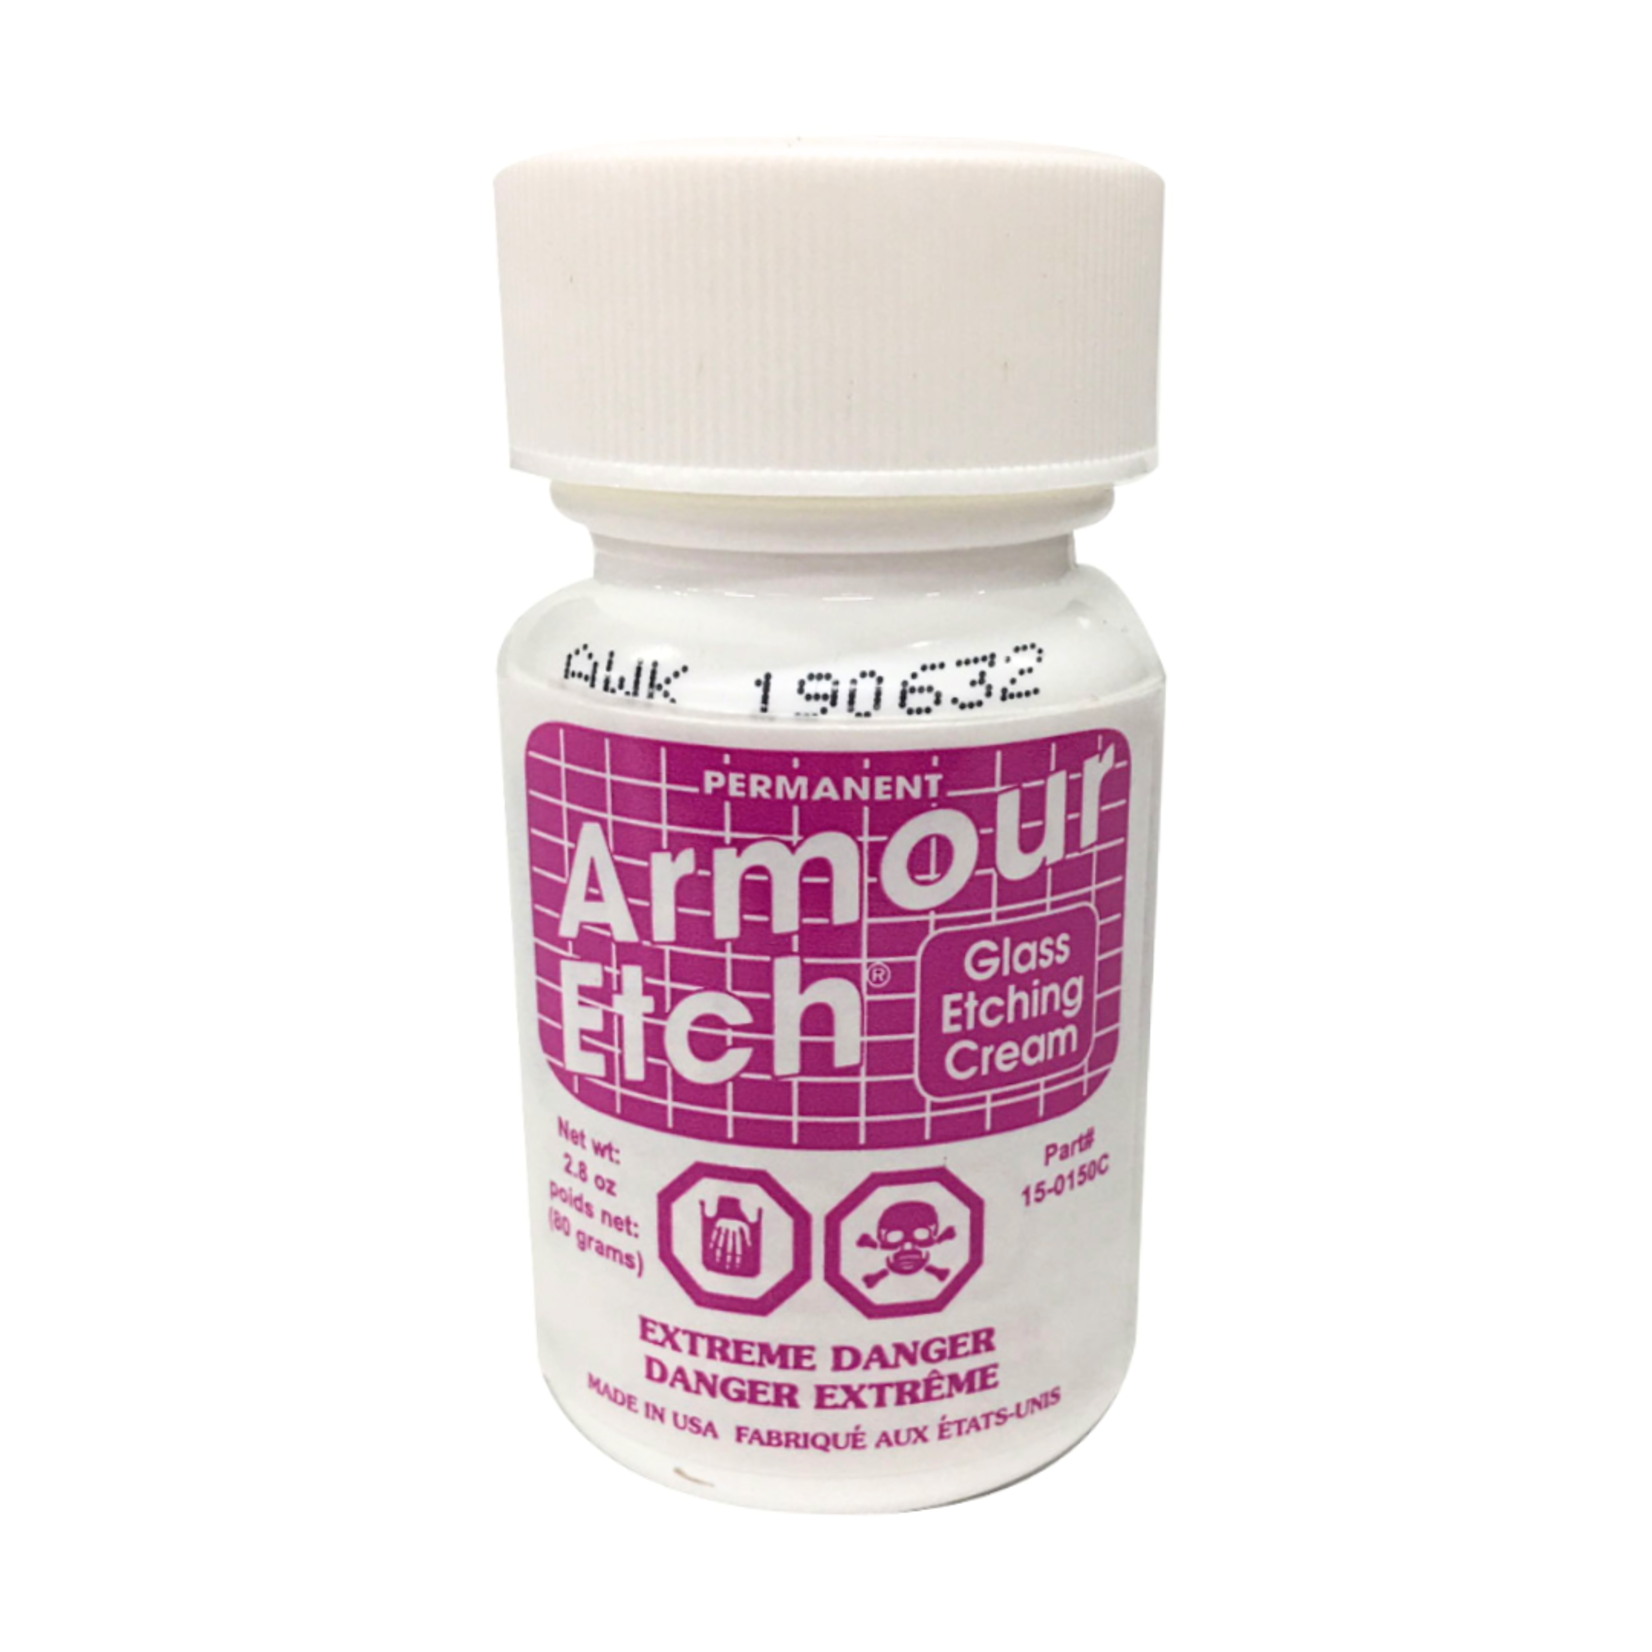 ARMOUR ETCH GLASS ETCHING CREAM 2.8OZ - The Gilded Rabbit